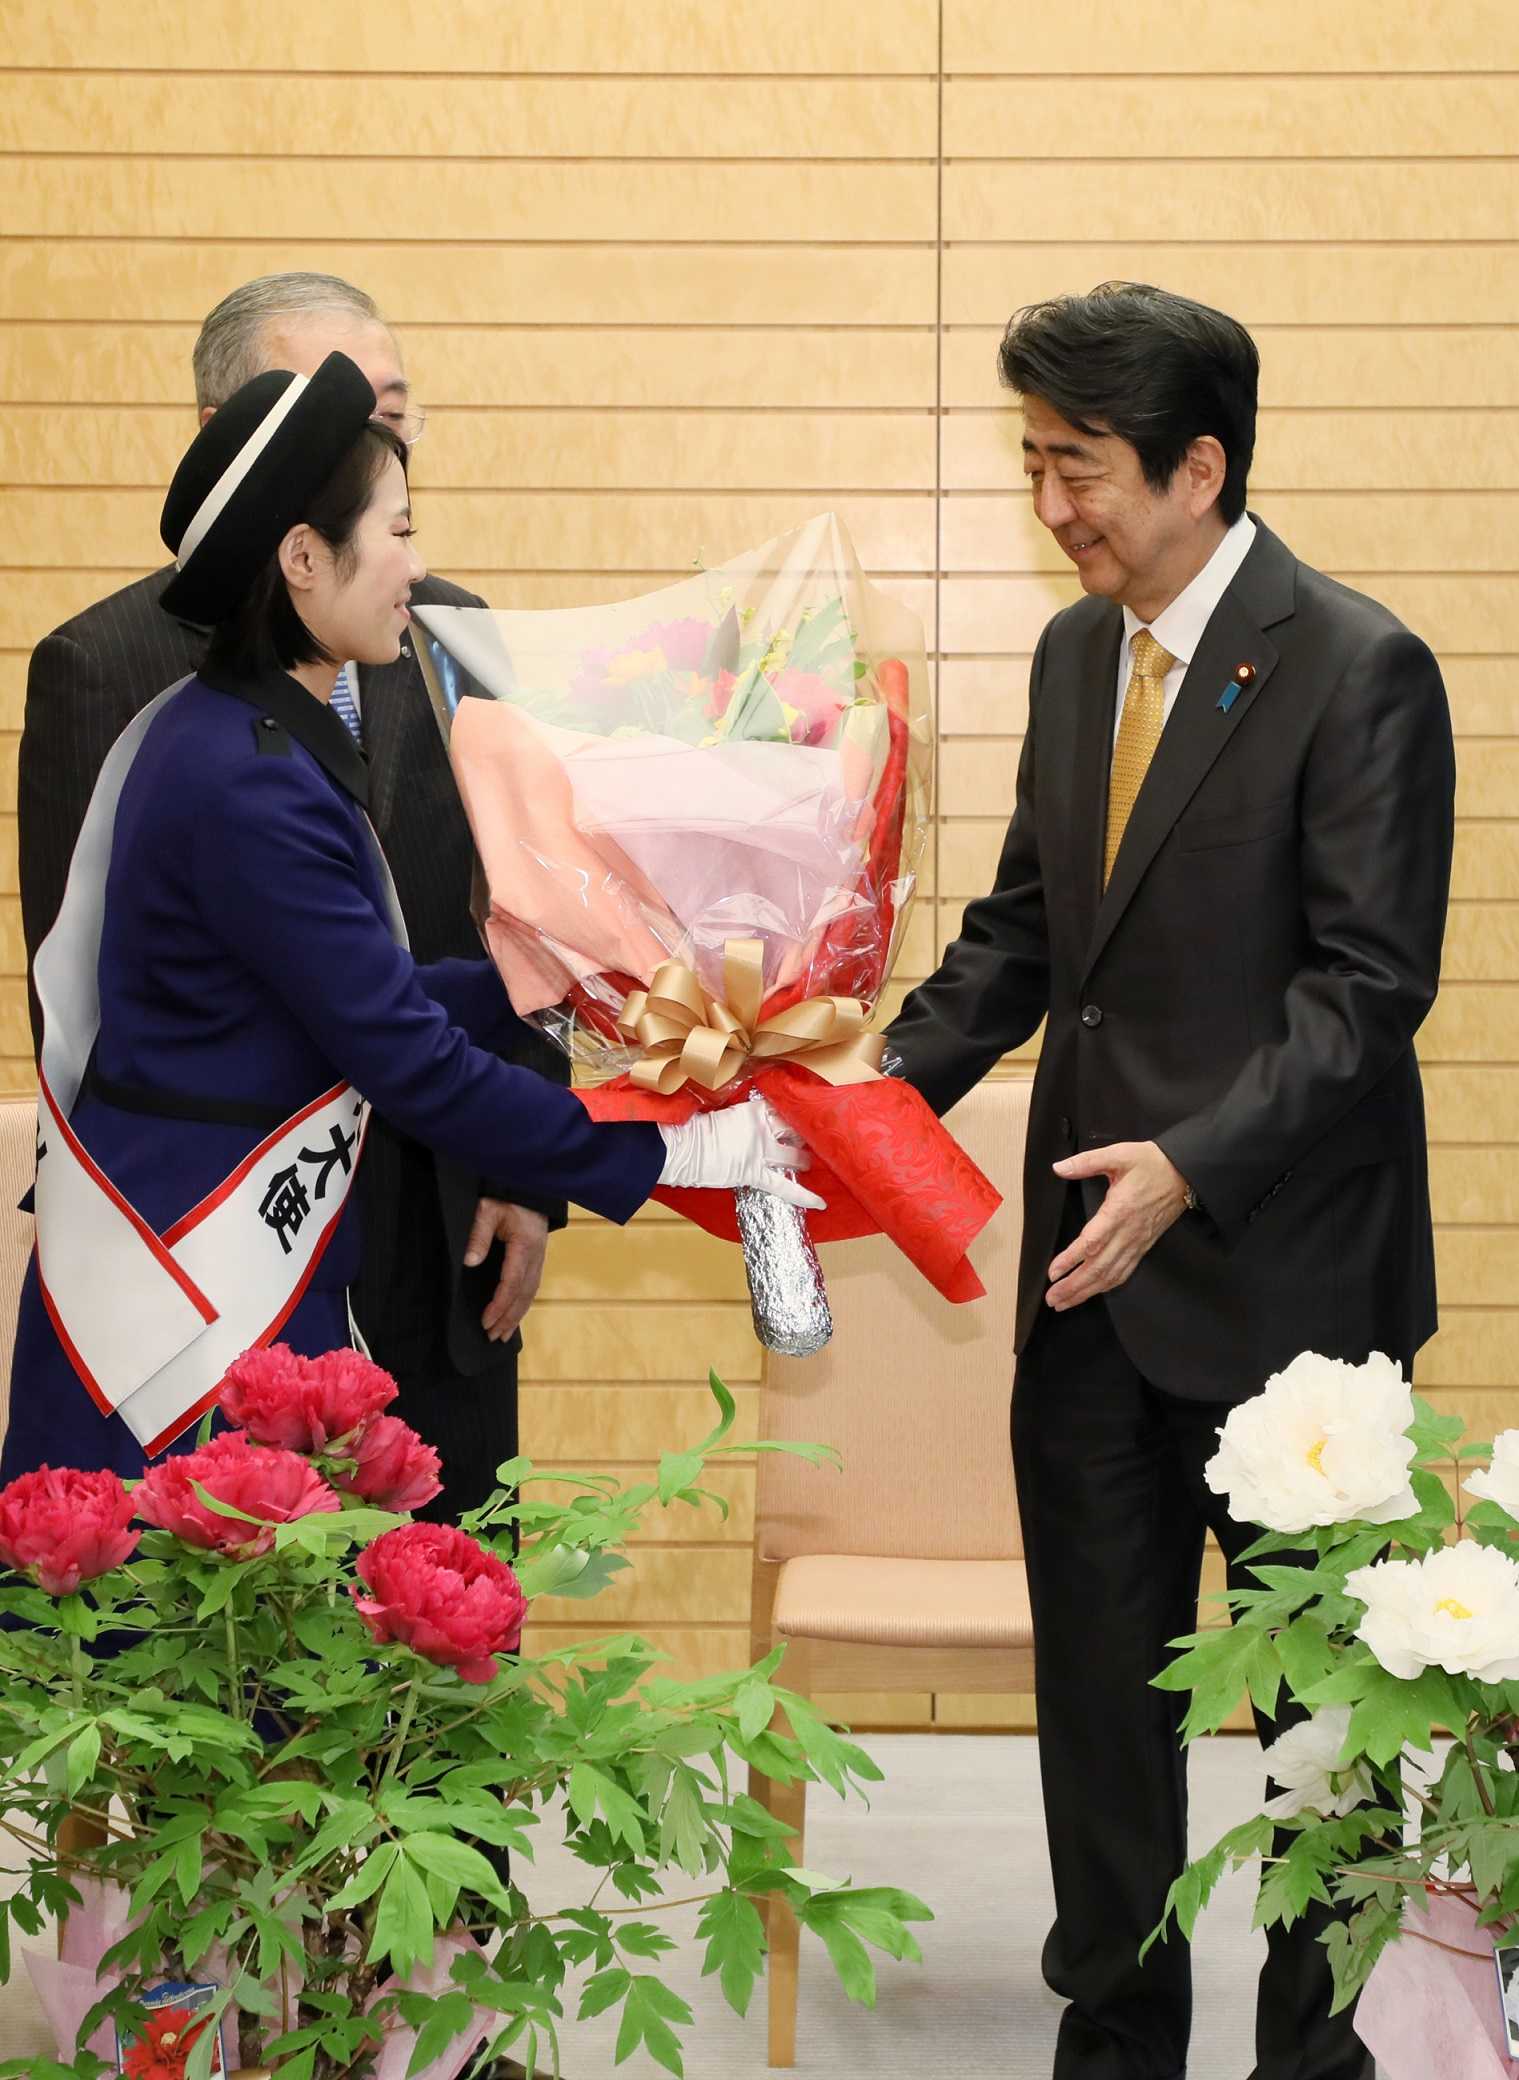 Photograph of the Prime Minister receiving the gifts